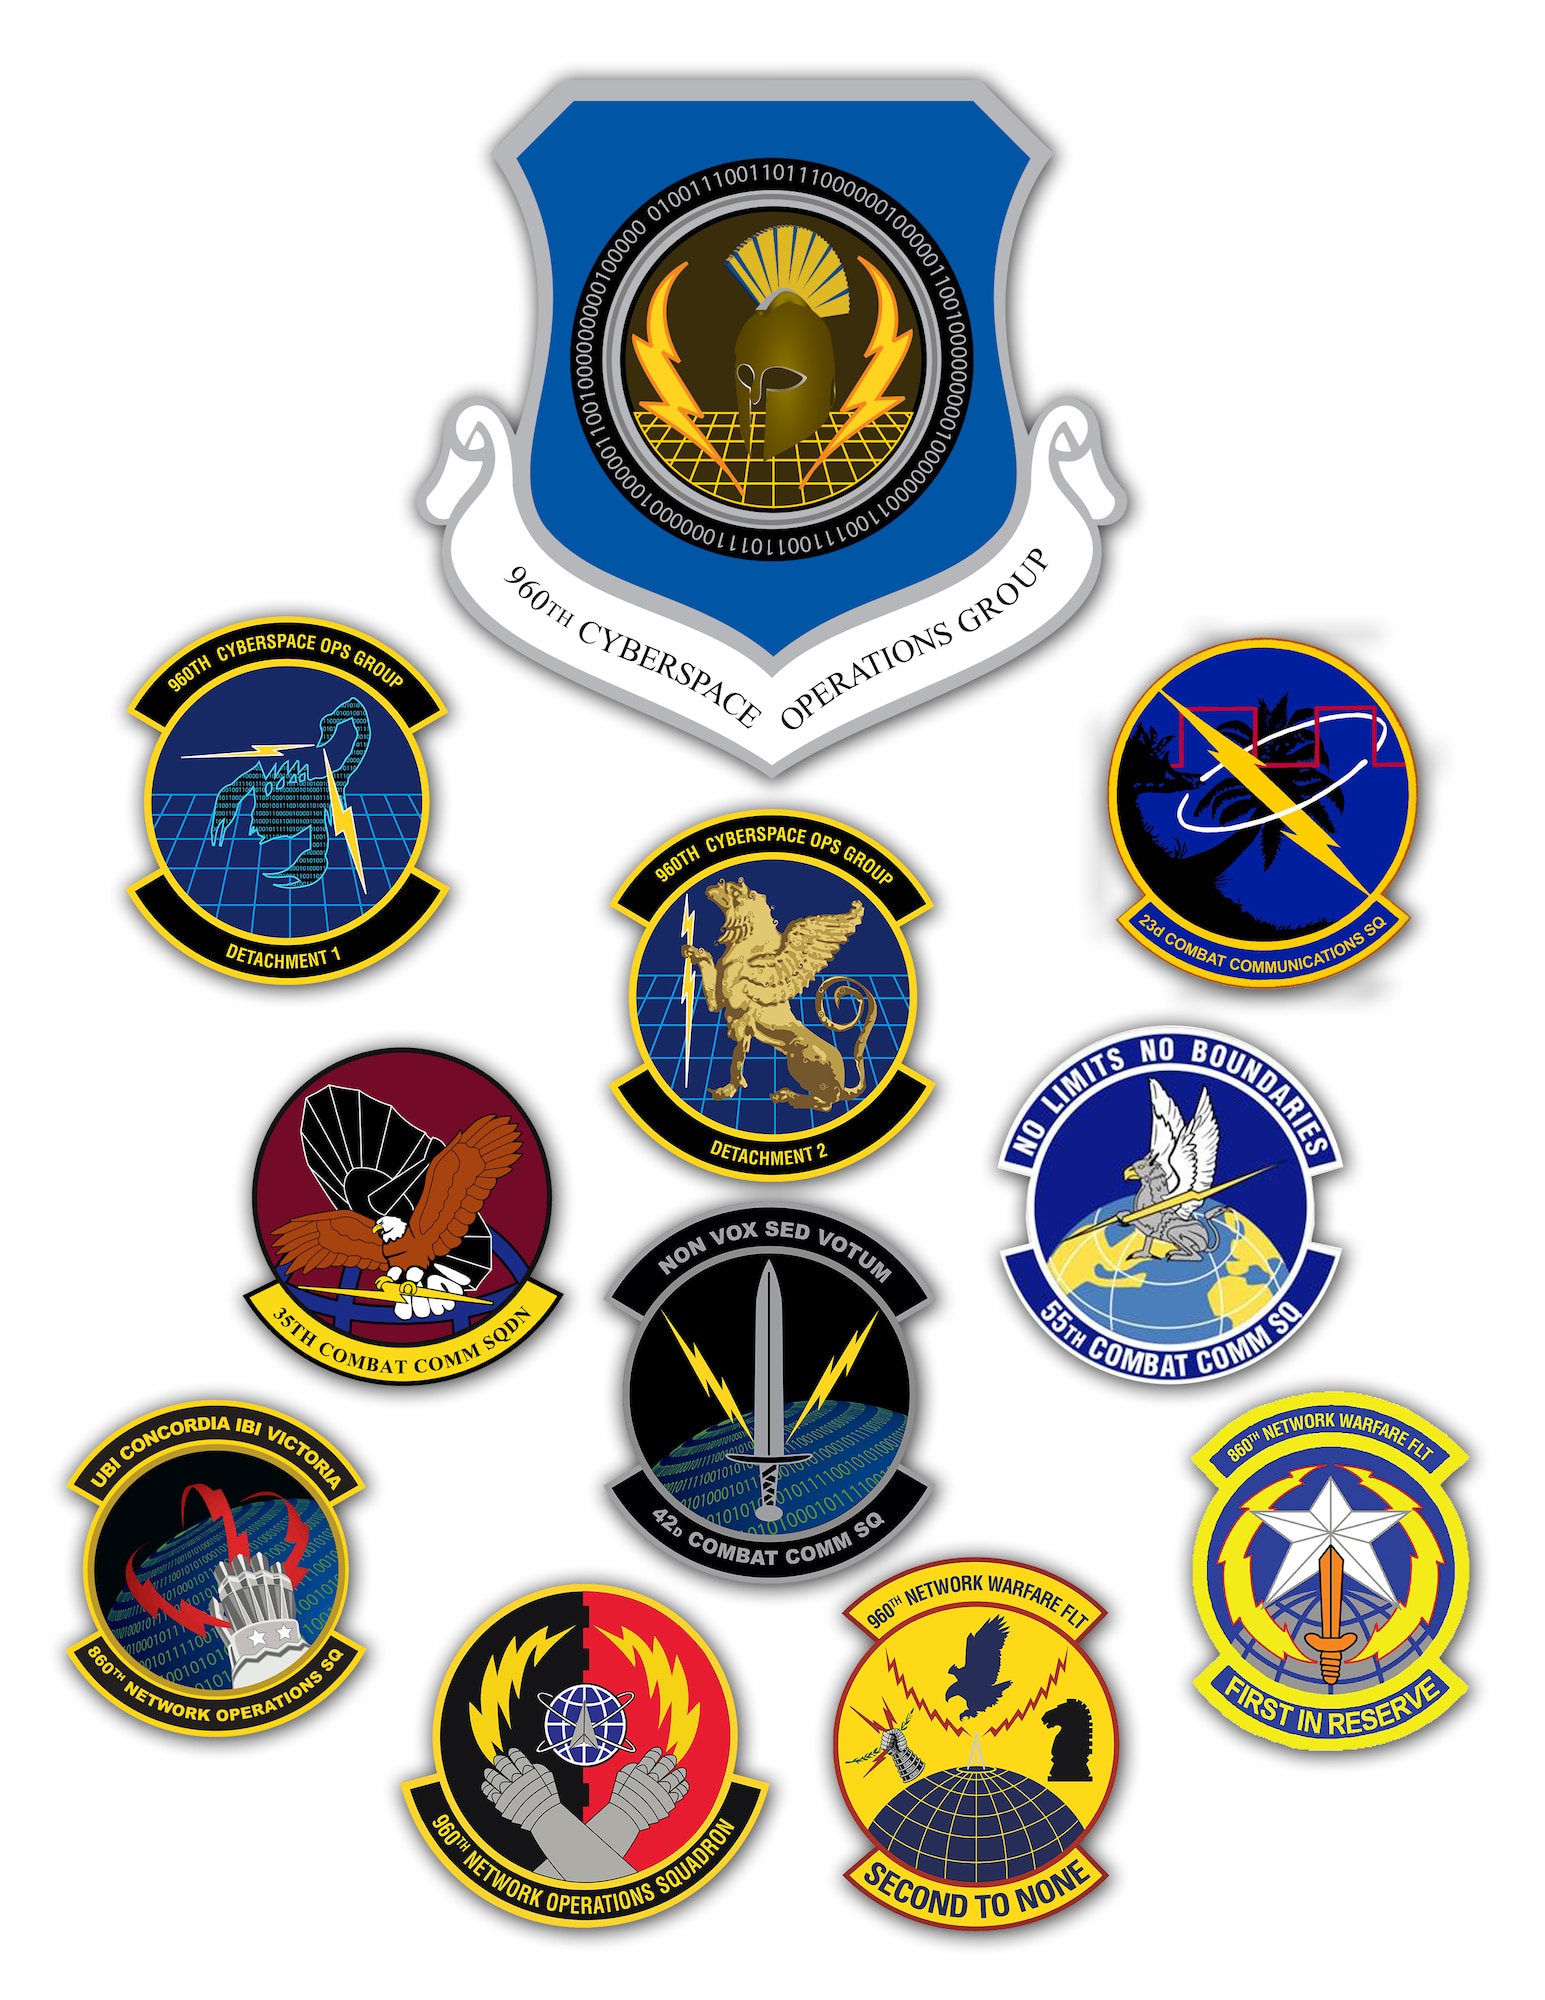 Air Force Reserve Command activated the 960th Cyberspace Operations Group at Joint Base San Antonio-Lackland, Texas, March 1, 2013. As the first cyberspace group in the Air Force, the 960th CYOG will have administrative control over 10 Reserve cyber organizations spread throughout the country. (U.S. Air Force graphic/Maria Eames)